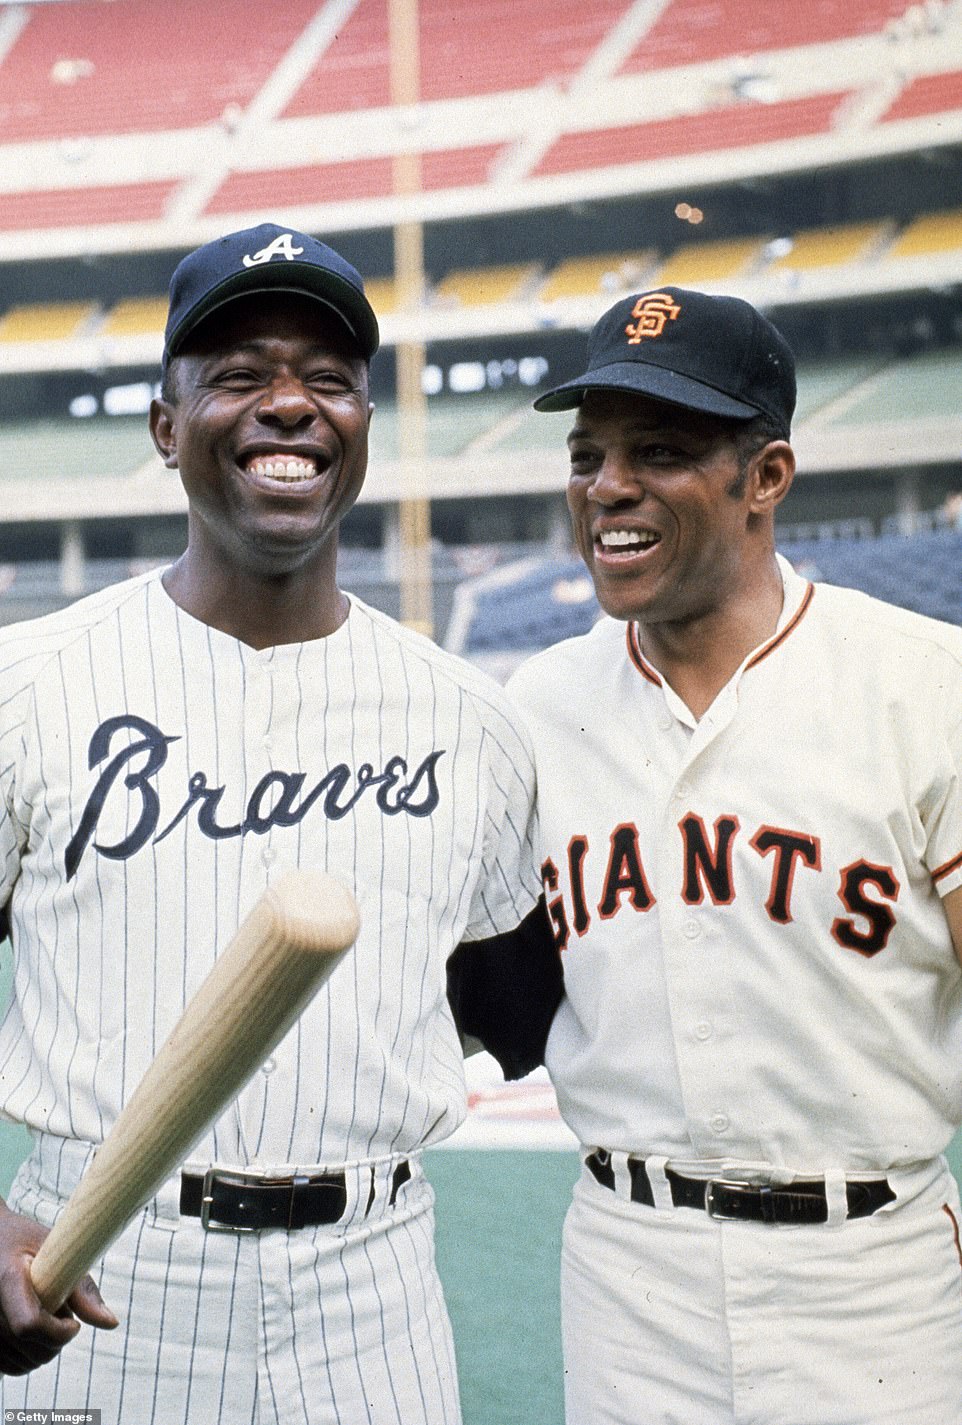 Often compared against each other, Hank Aaron (left) and Willie Mays (right) shared a number of similar experiences in MLB